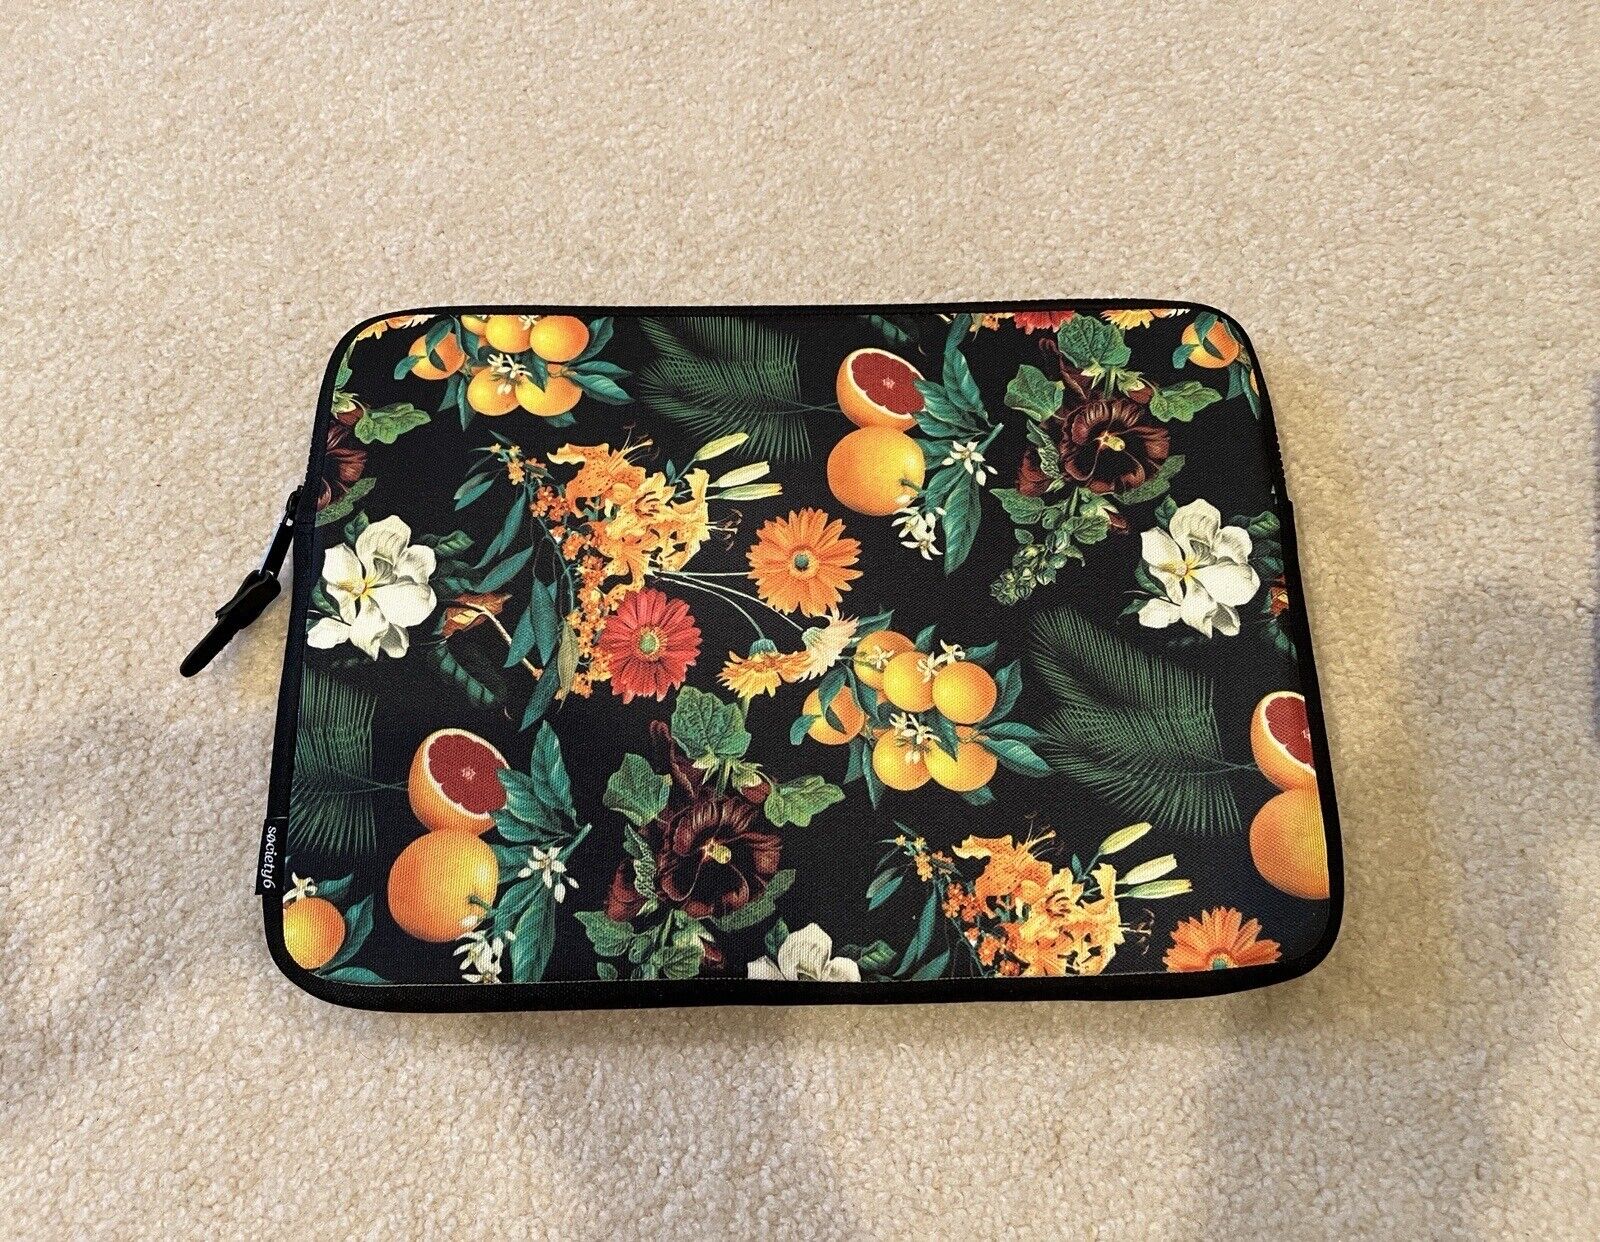 Society 6 Laptop Sleeve 13” Fruit and Floral *New in Package*